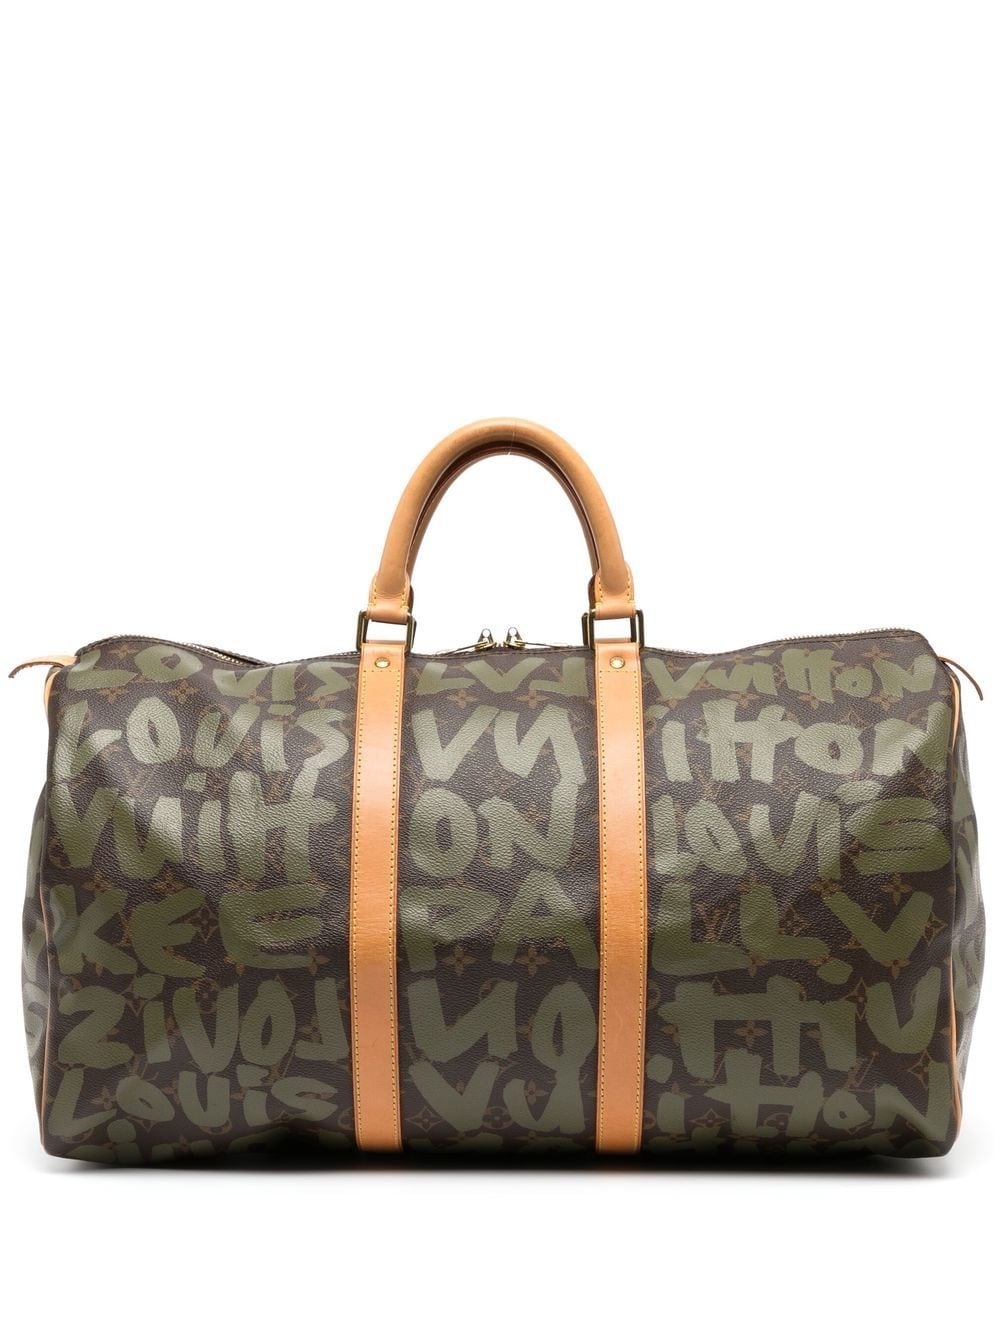 Louis Vuitton x Stephen Sprouse 2001 pre-owned Keepall 50 Holdall Bag -  Farfetch